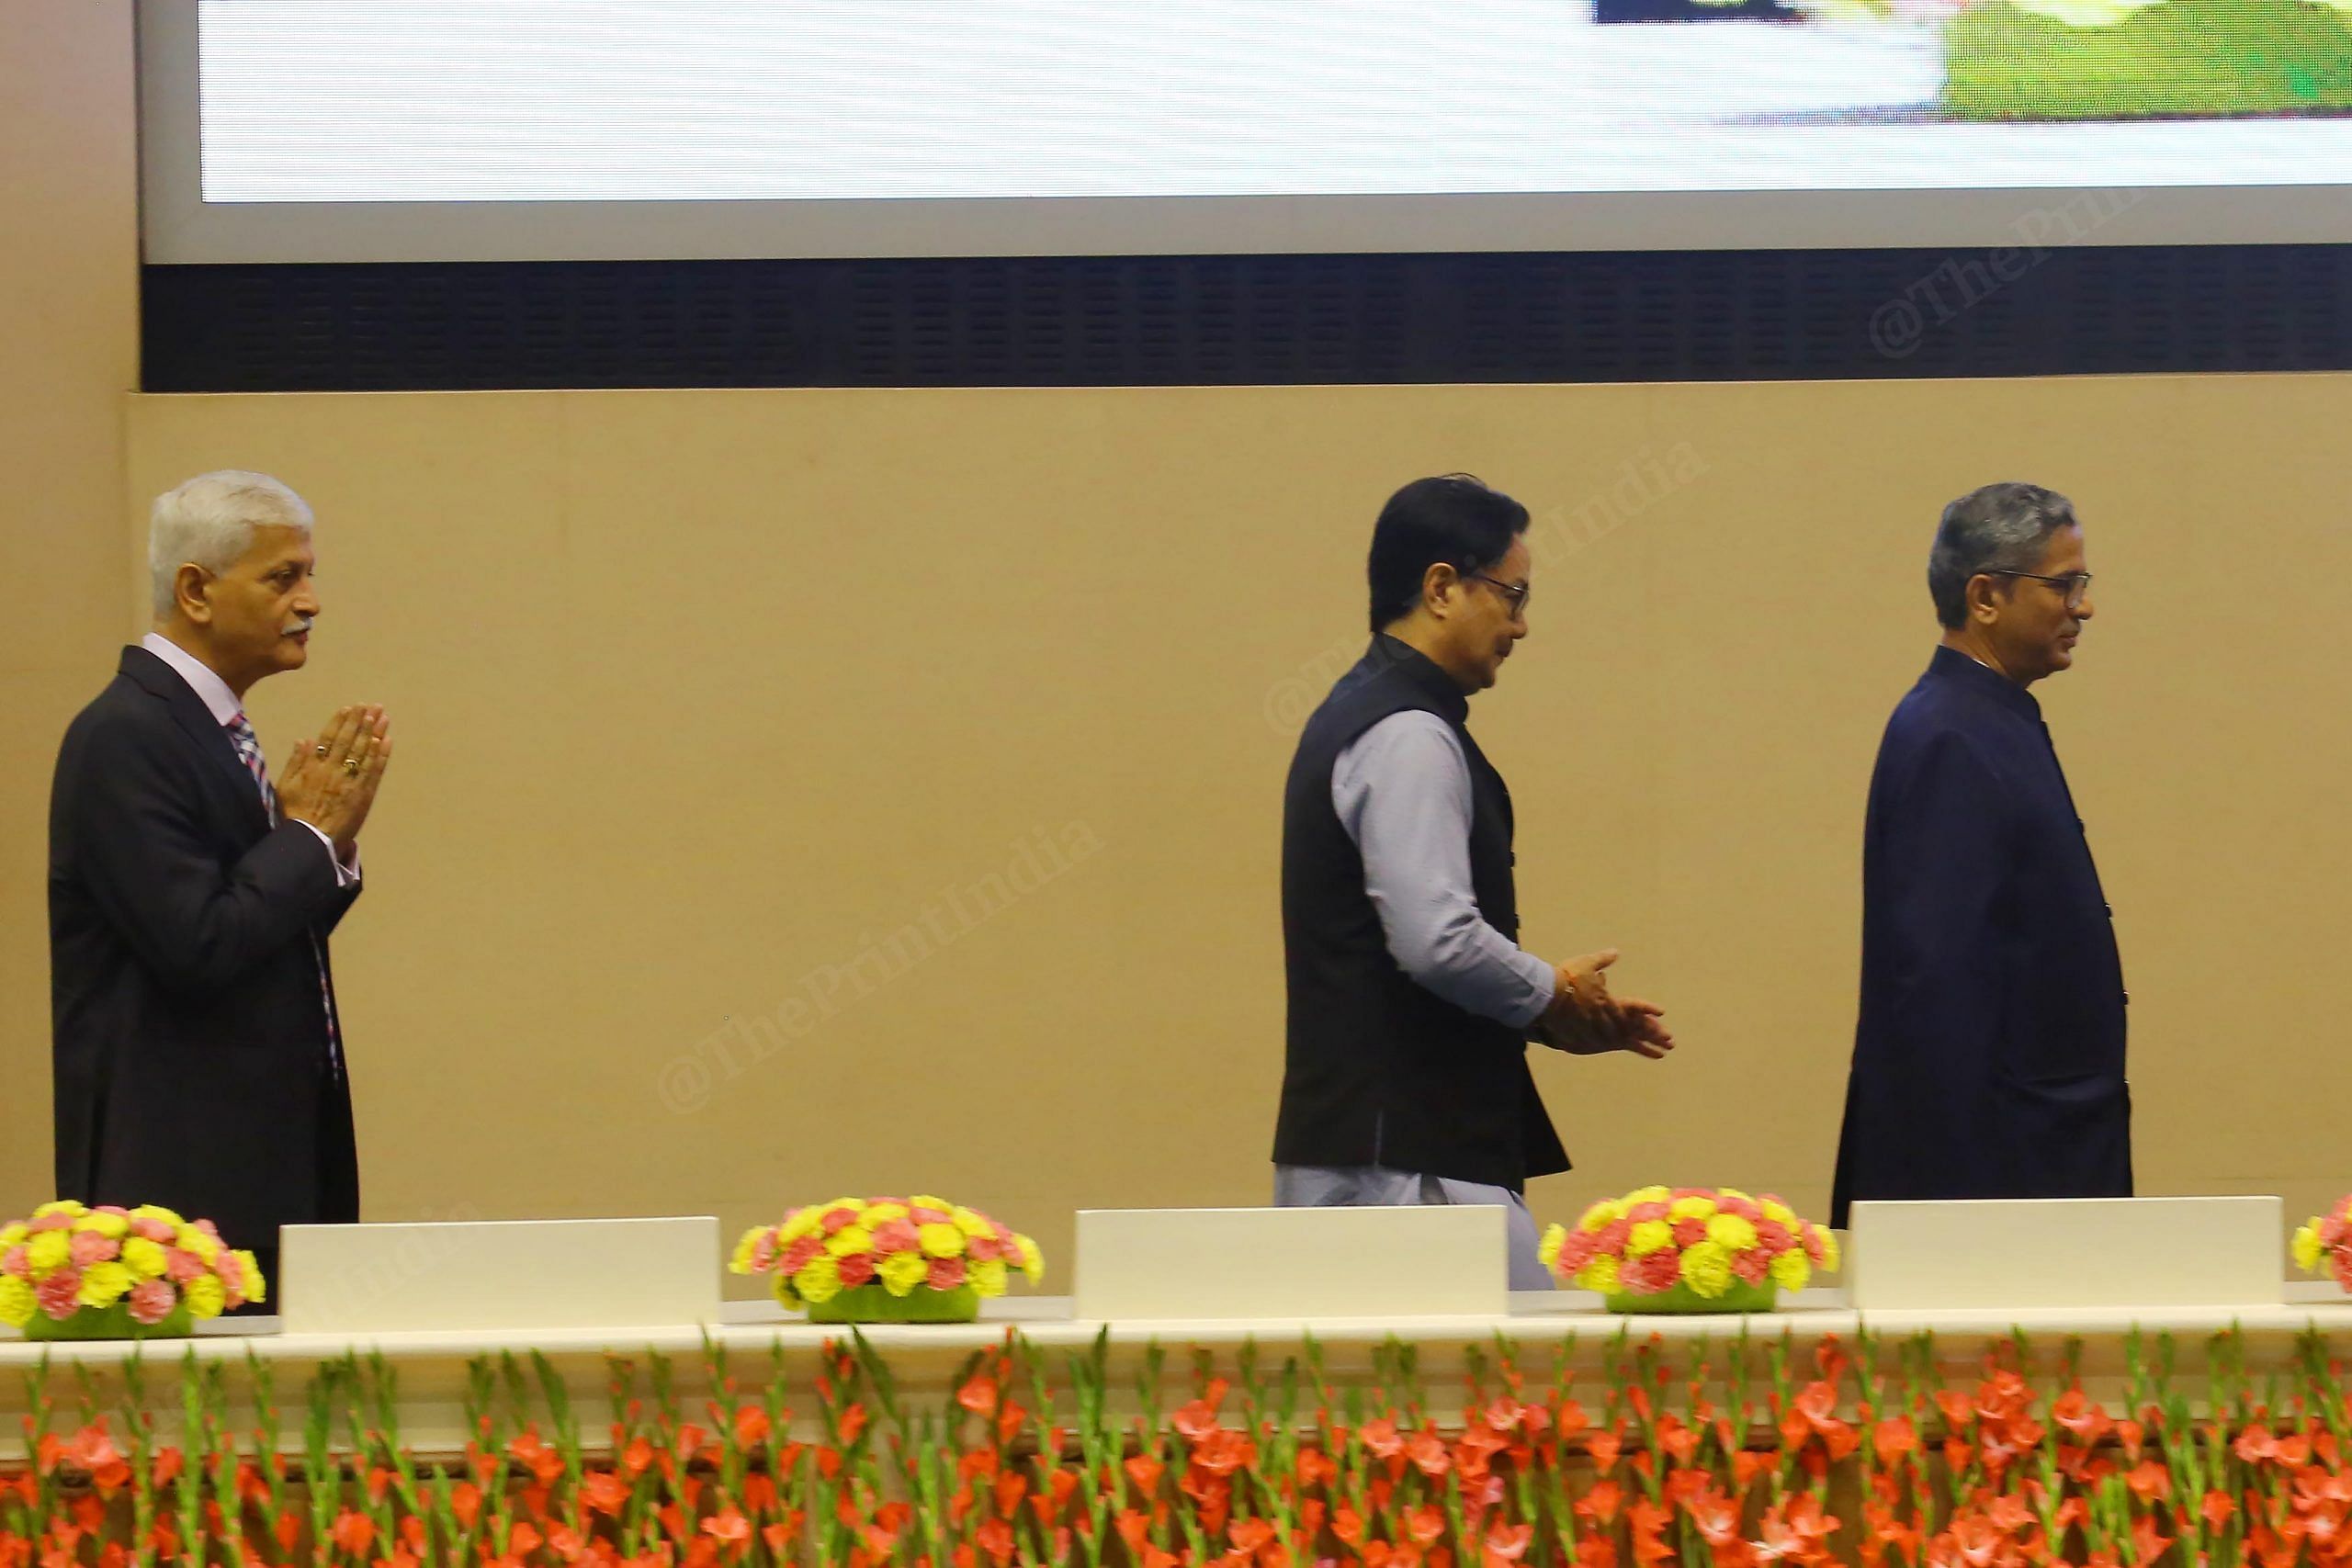 Chief Justice of India N.V. Ramana, Law & Justice Minister Kiren Rijiju and upcoming CJI Uday Umesh Lalit entering before an event at Vigyan Bhawan | Praveen Jain | ThePrint